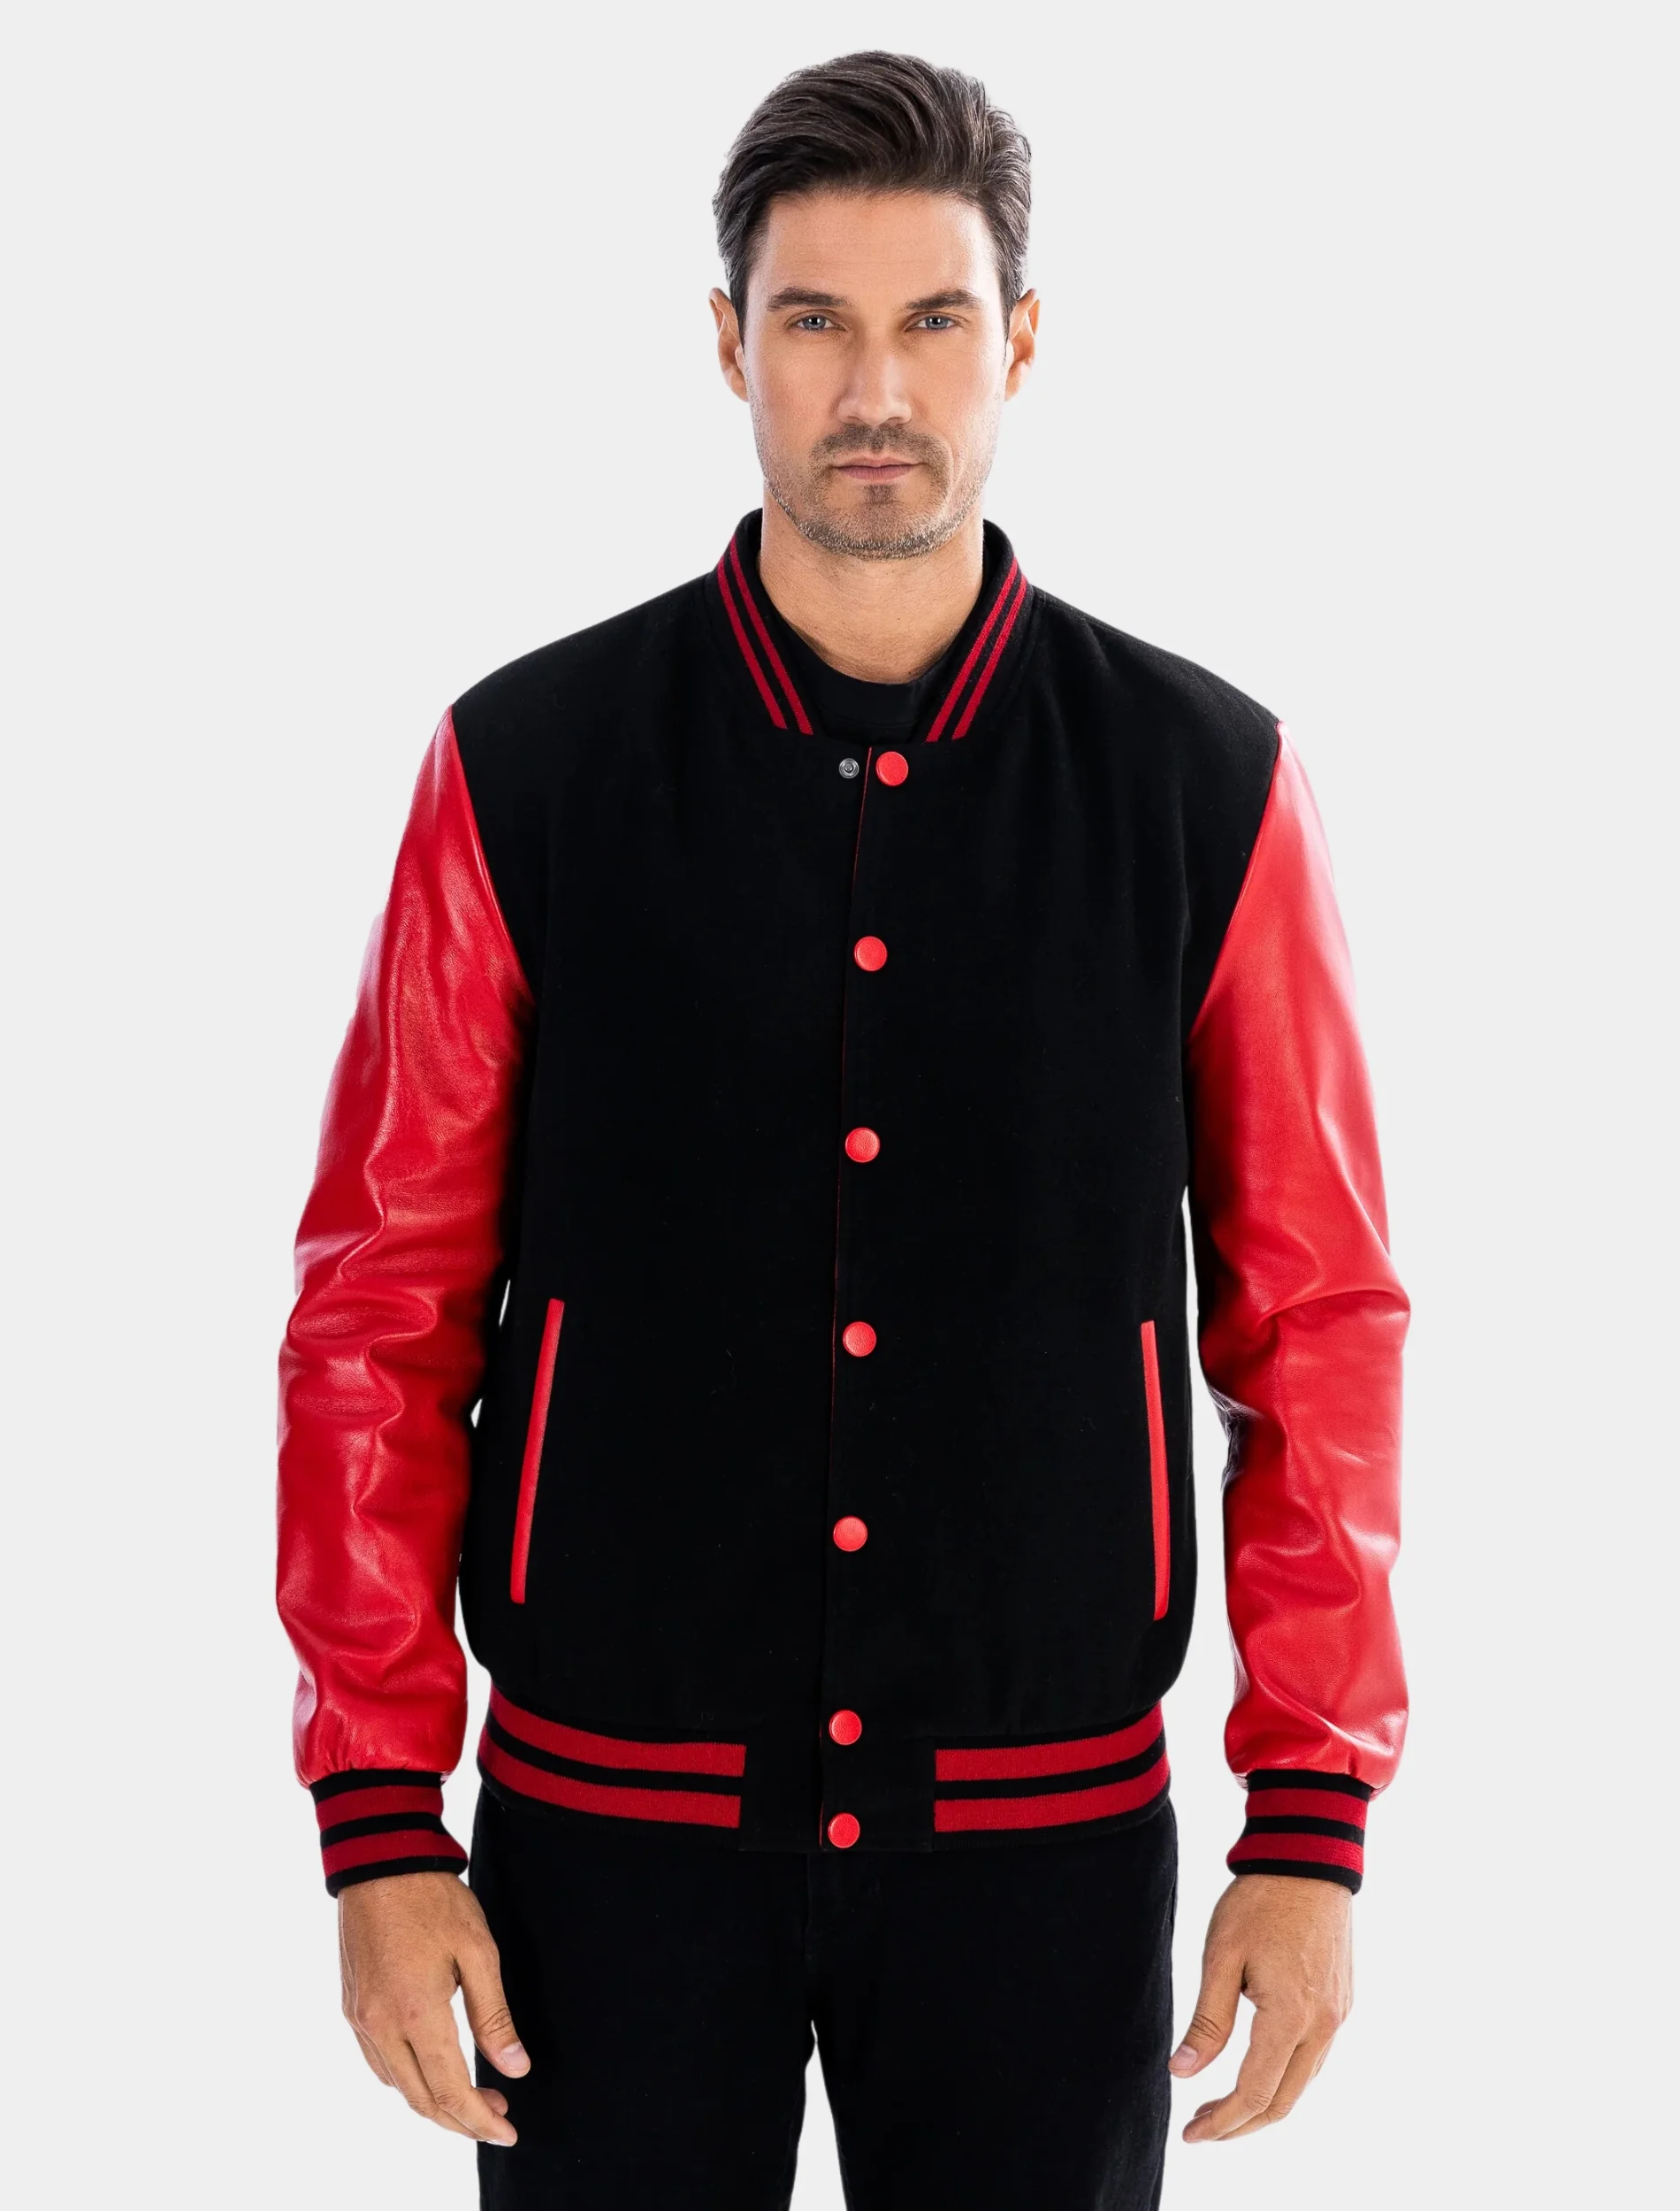 Mens Classic Black and Red Wool College Varsity Jacket